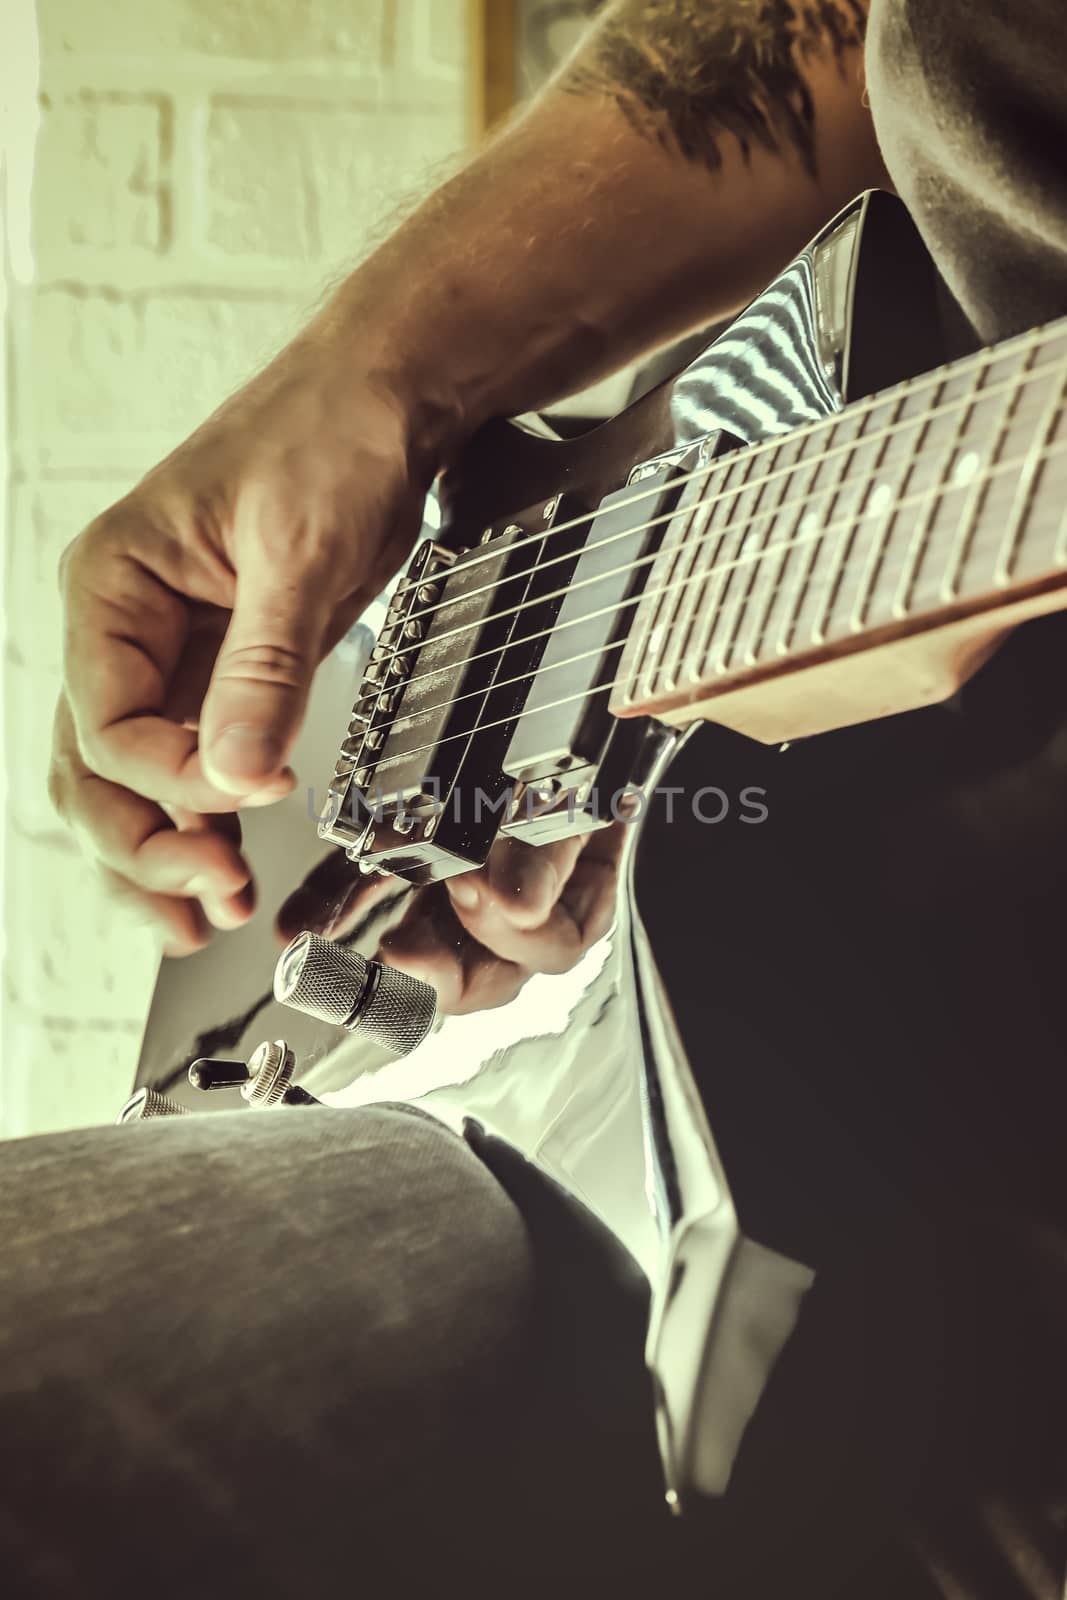 Musical lifestyle background. Playing the guitar. Guitarist's hand dynamic motion. Macro closeup.